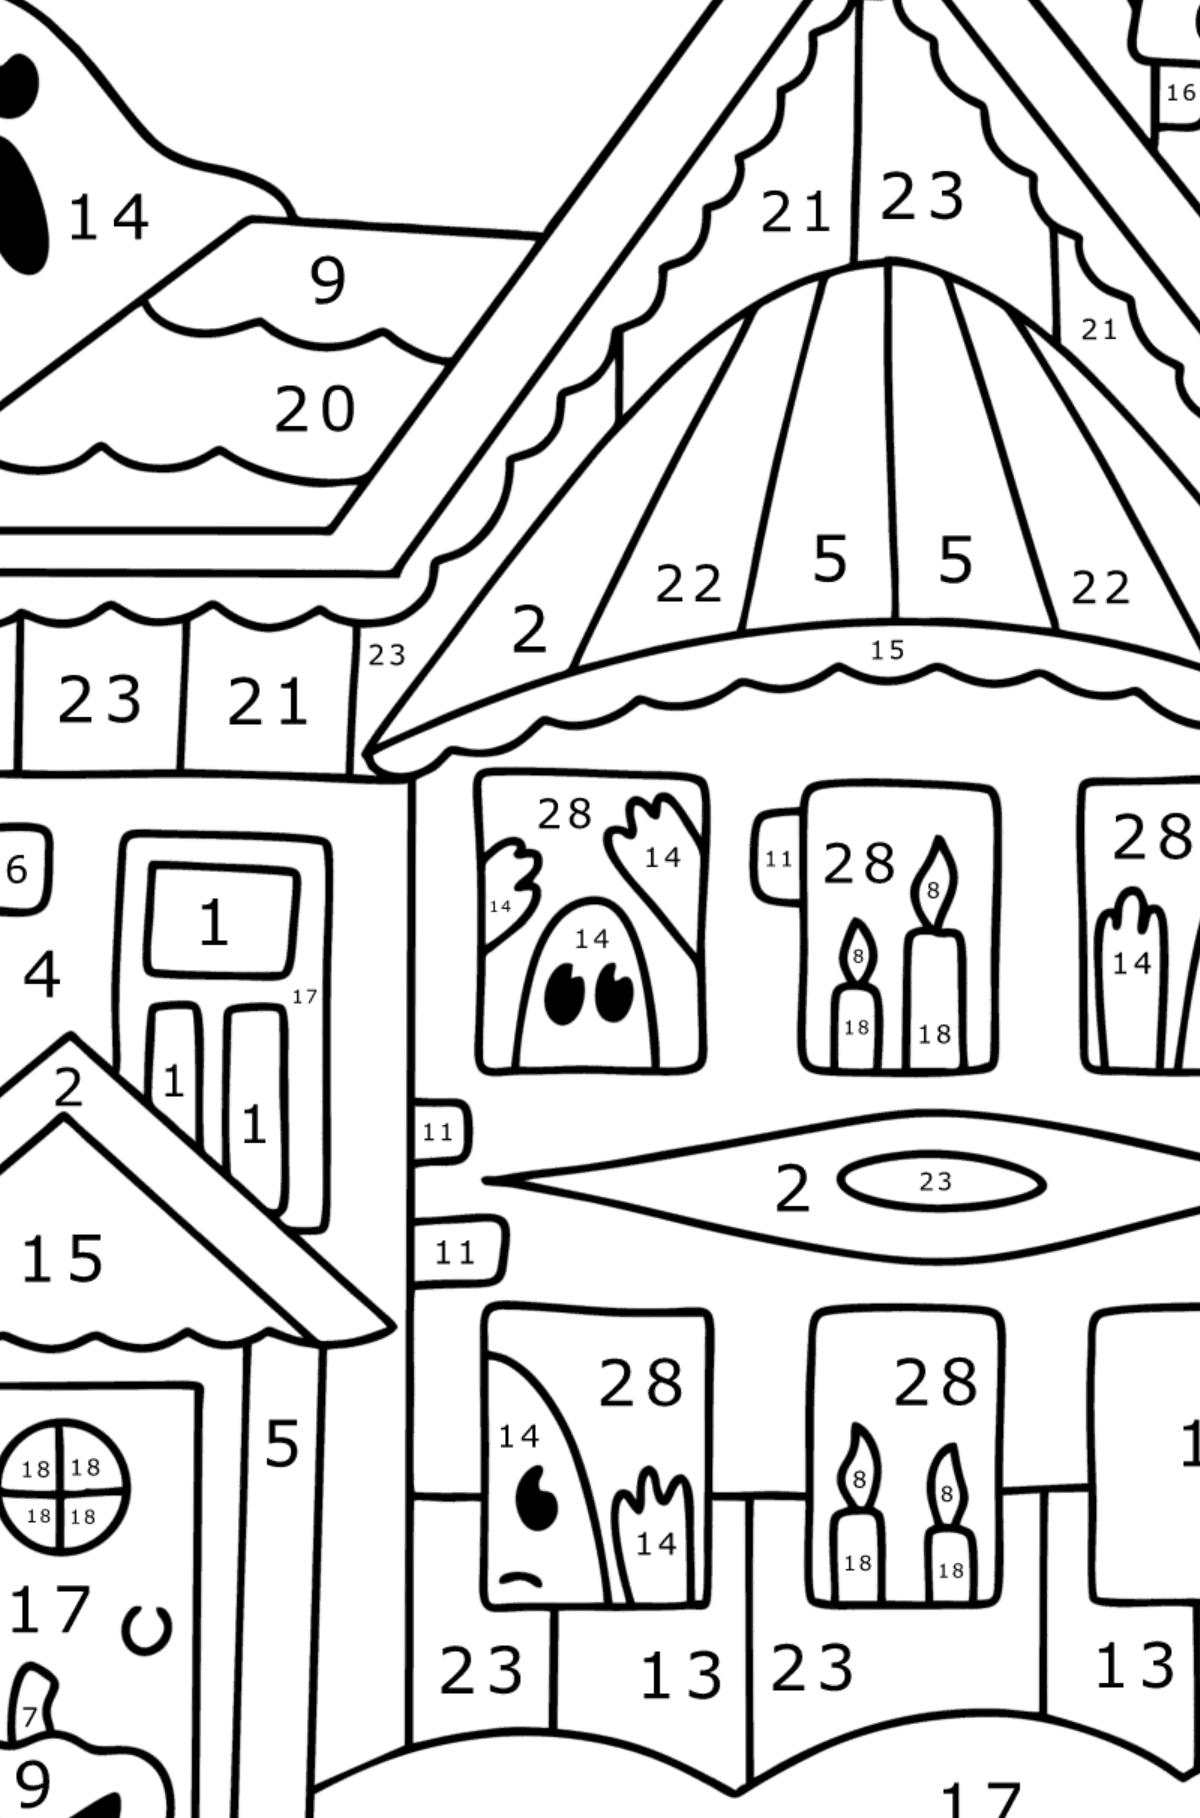 Haunted House coloring page - Coloring by Numbers for Kids